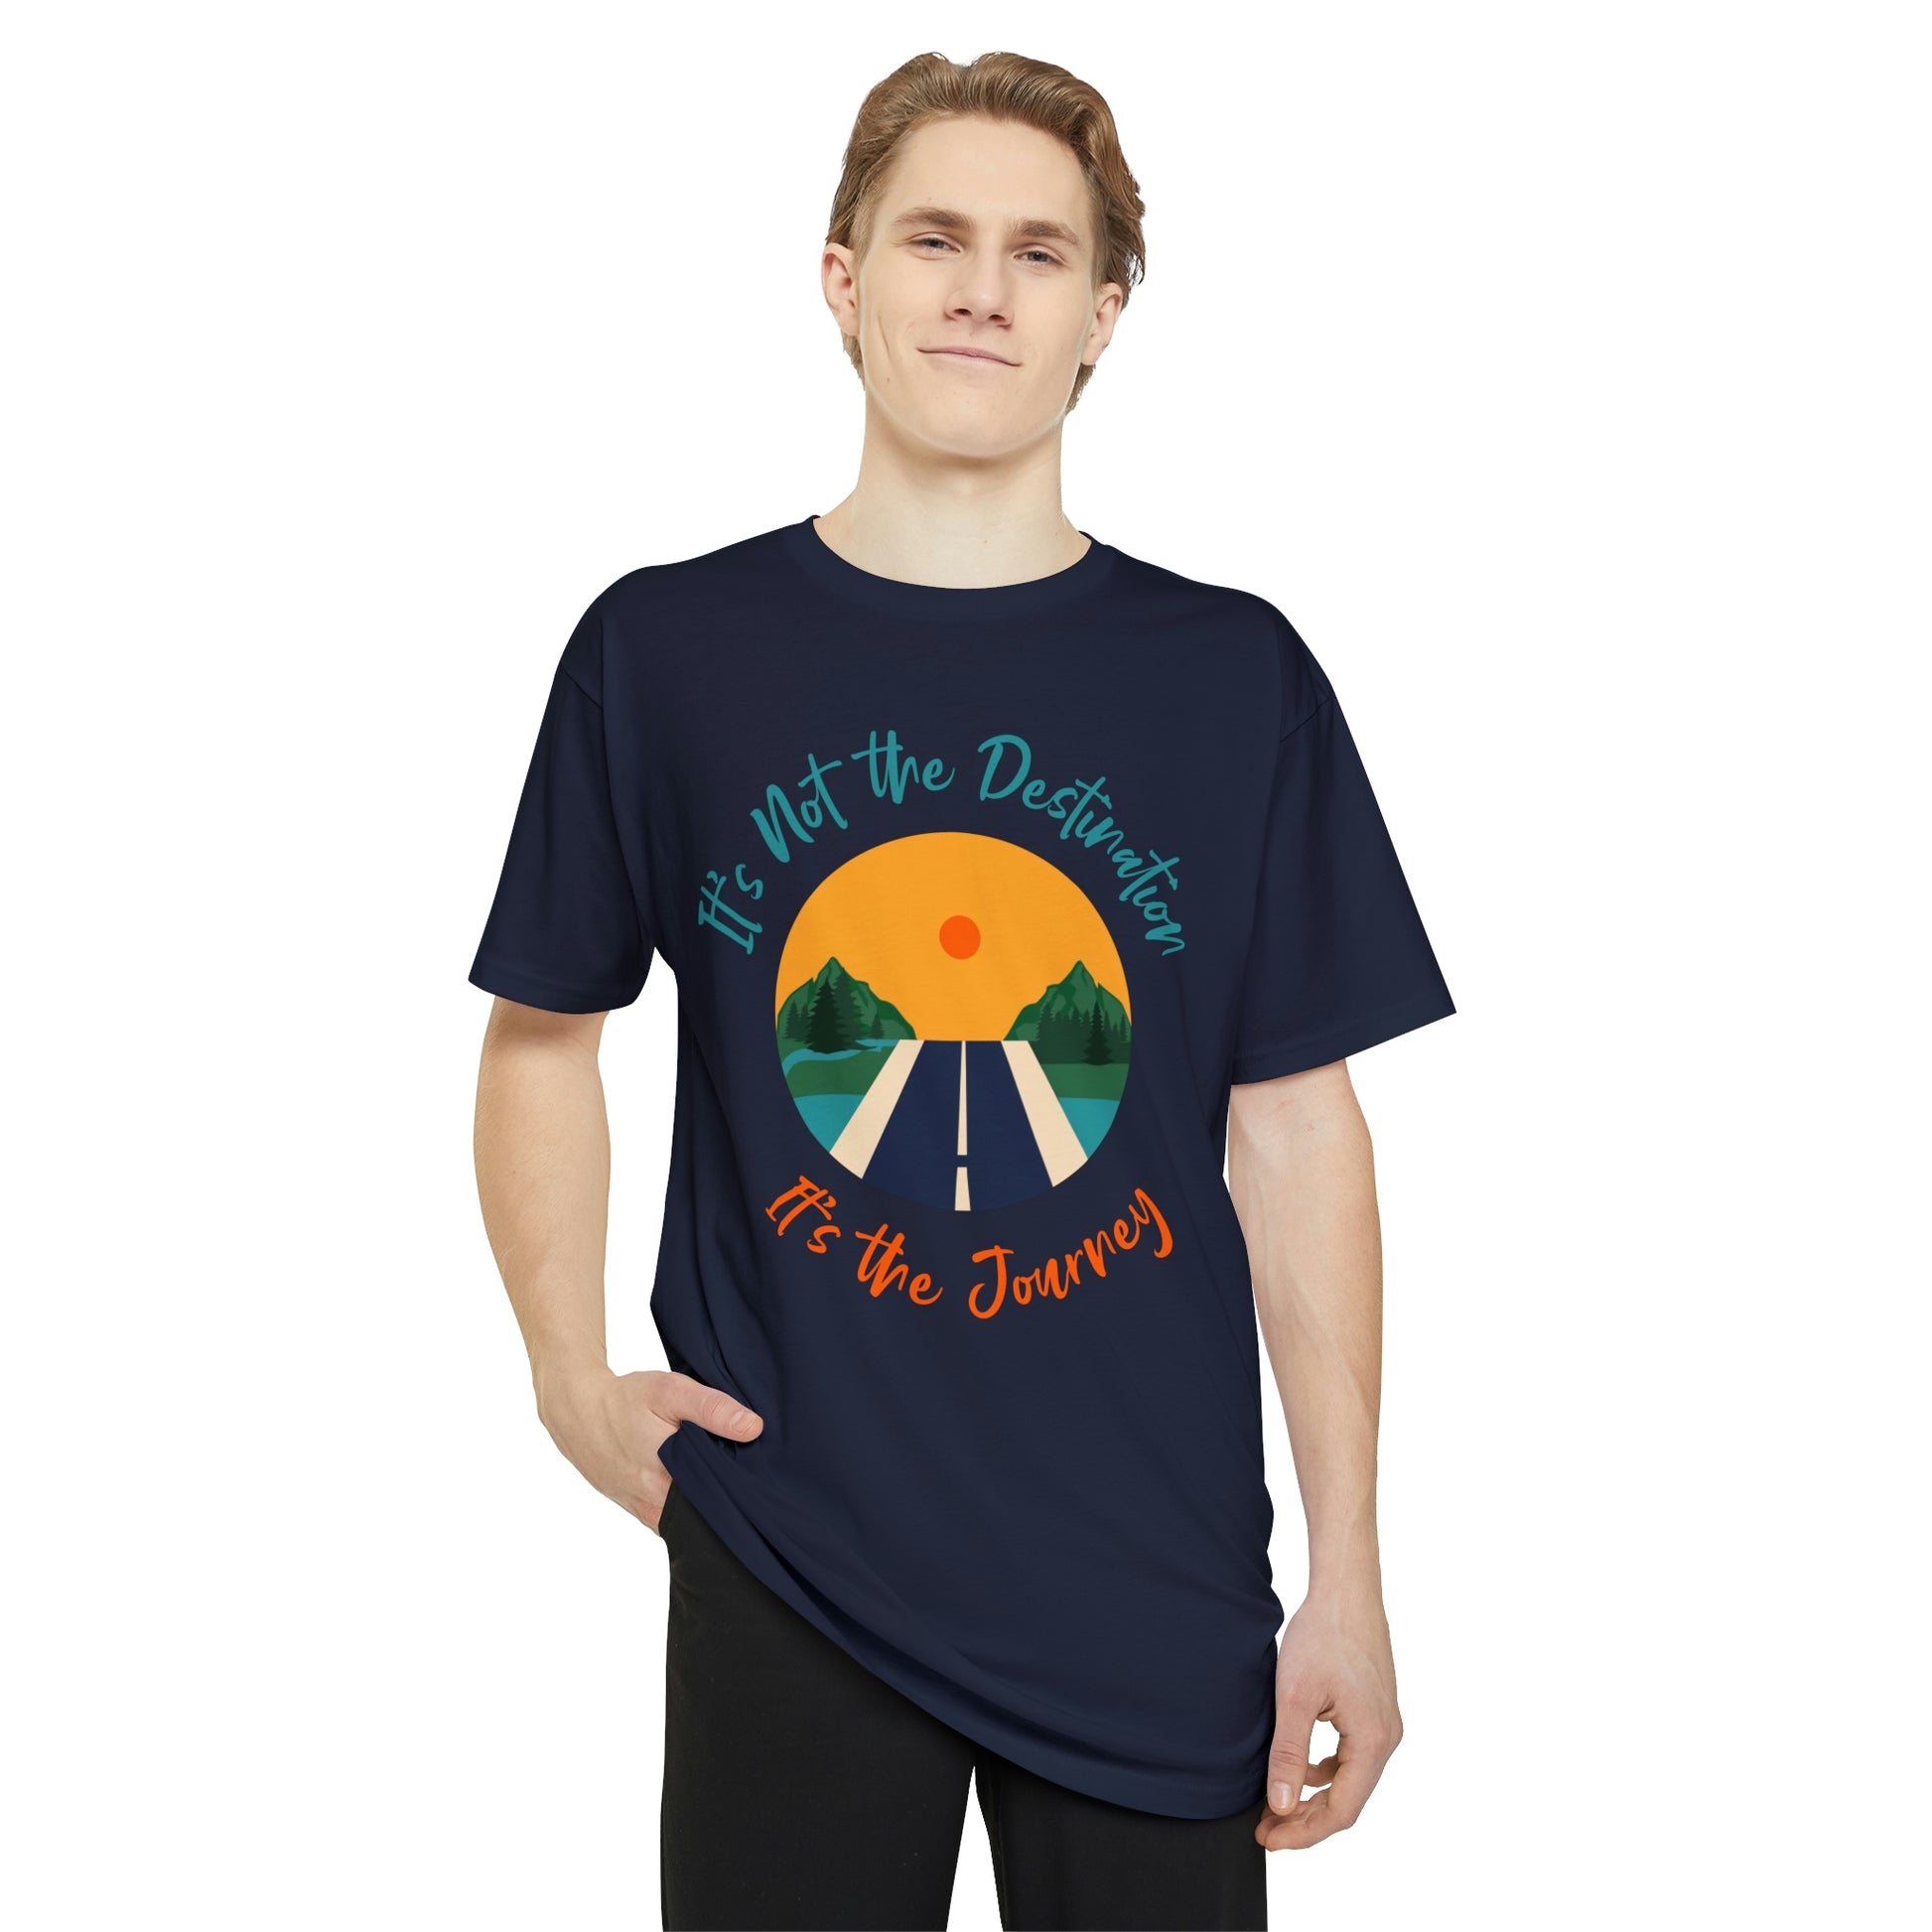 Mock up of tall man showing the front of the Navy Blue t-shirt